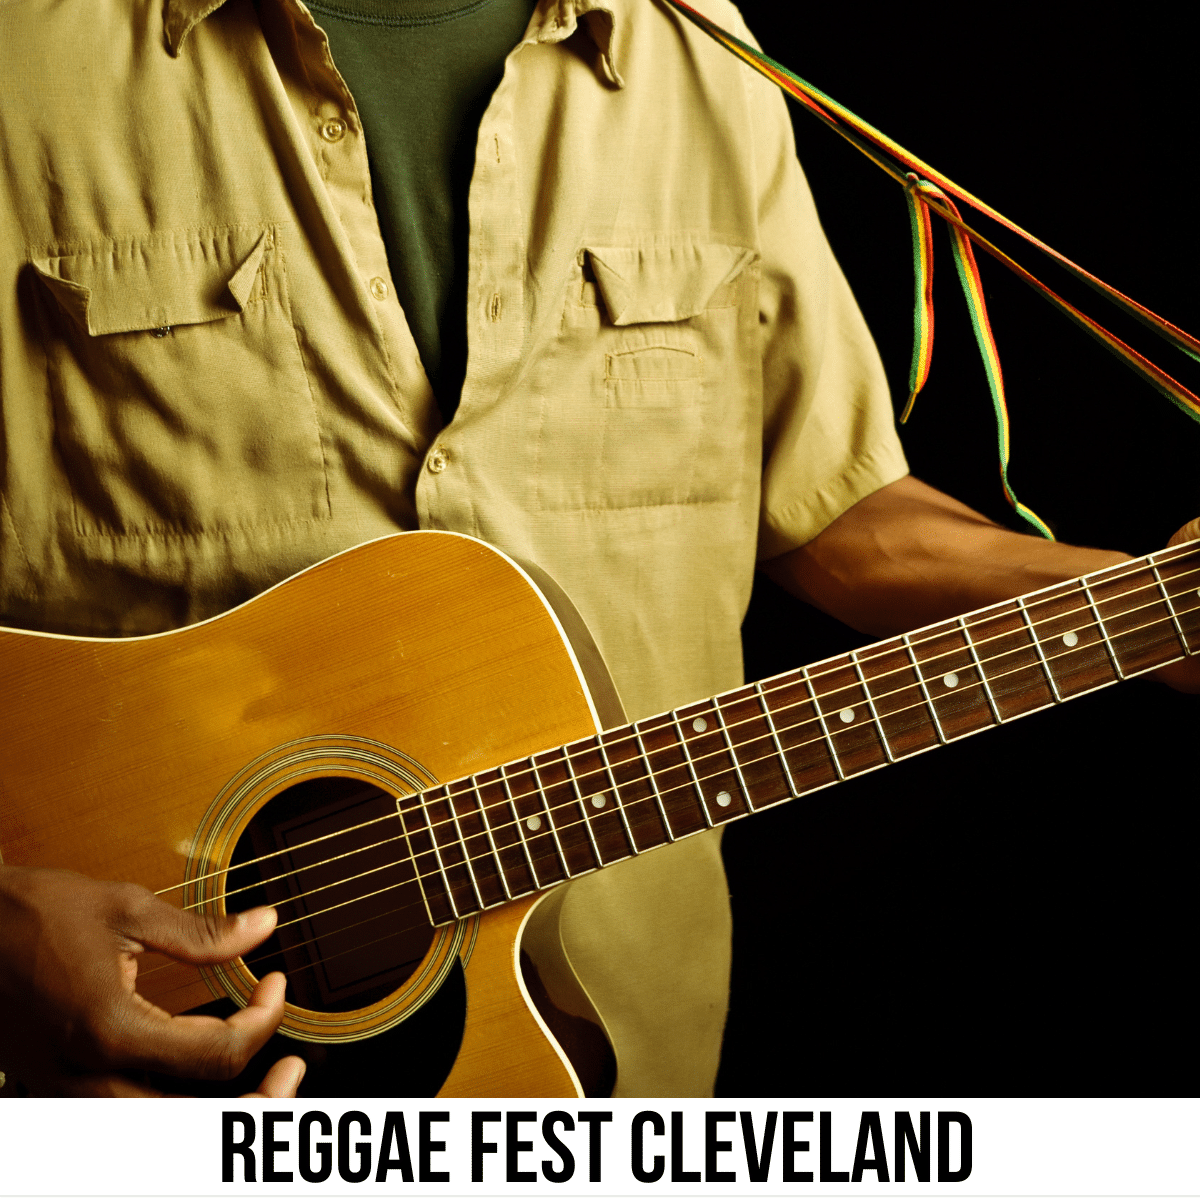 A square image of a close-up photo of a person in a light-colored shirt playing the guitar. A white strip across the bottom has text Reggae Fest Cleveland. 